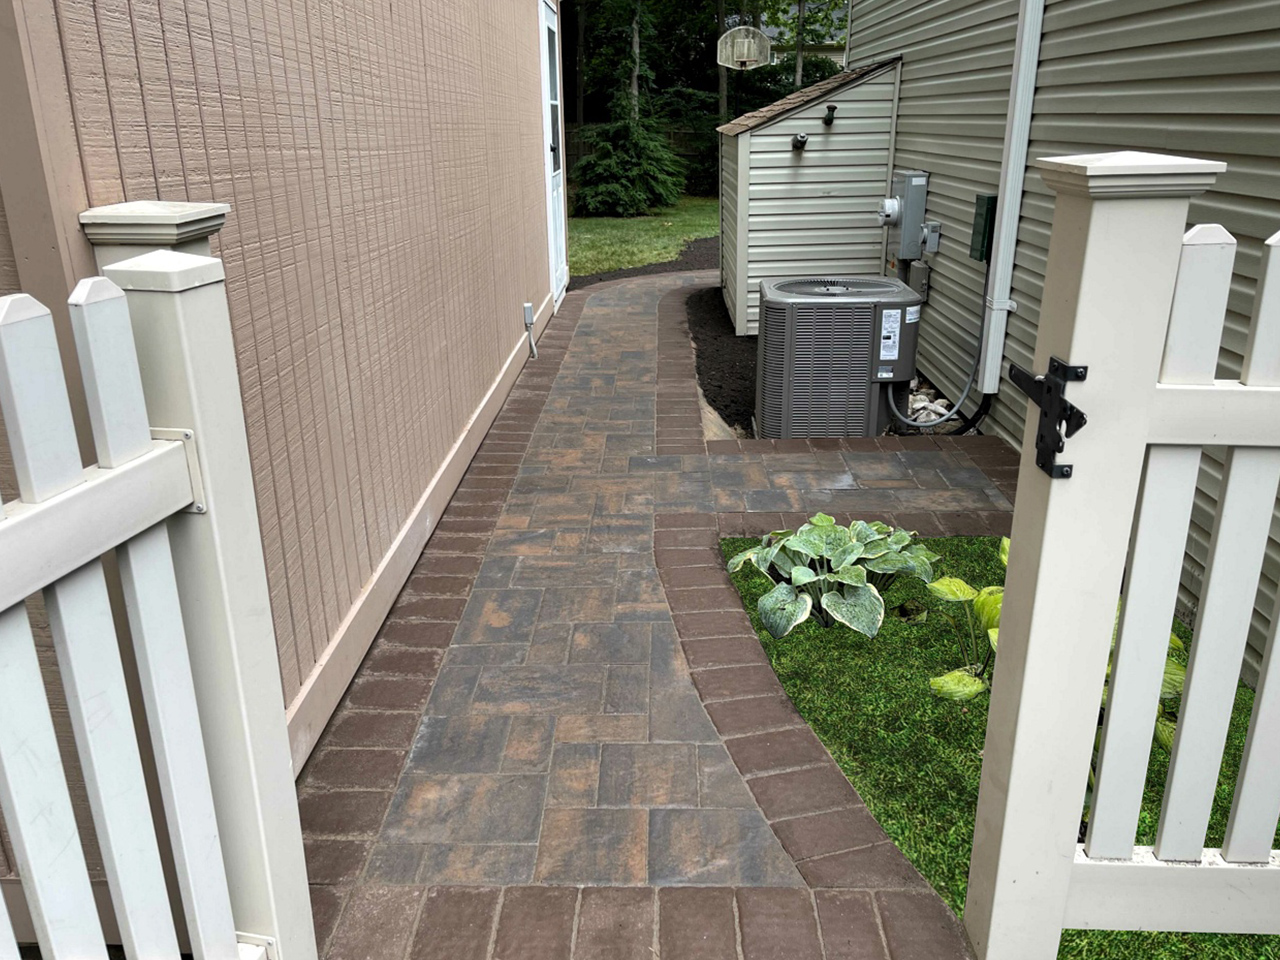 paver walkway installation. Impeccable craftsmanship on display in this finished patio walkway by Affordable Patio, with attention to detail in every step